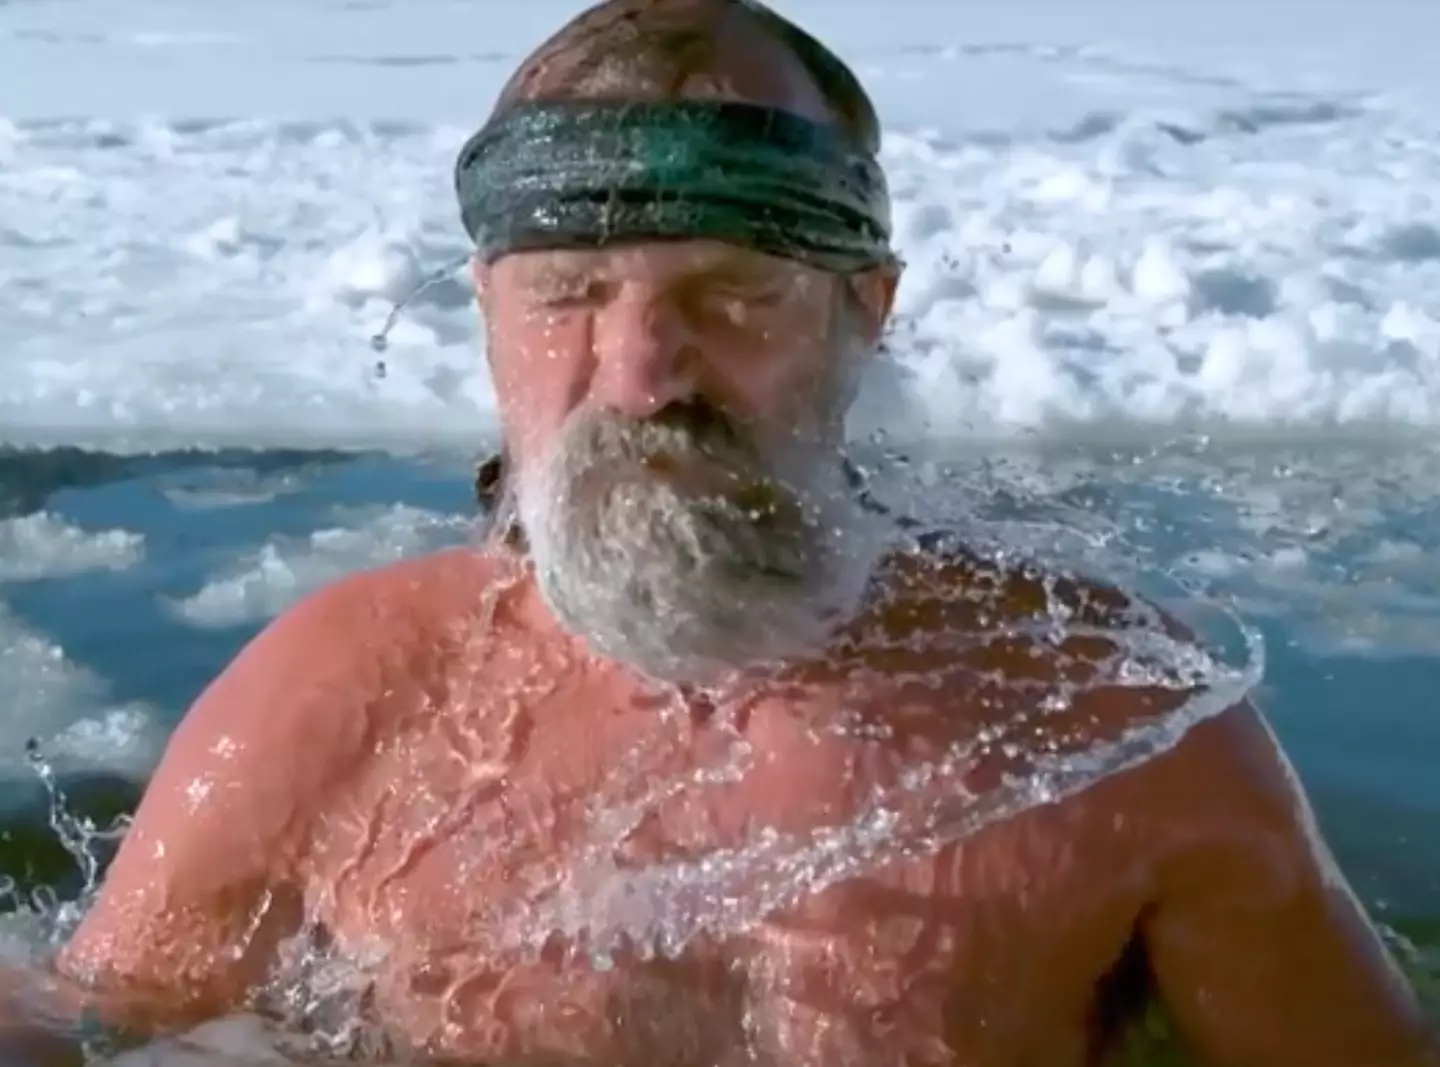 Wim Hof is known for withstanding freezing temperatures.